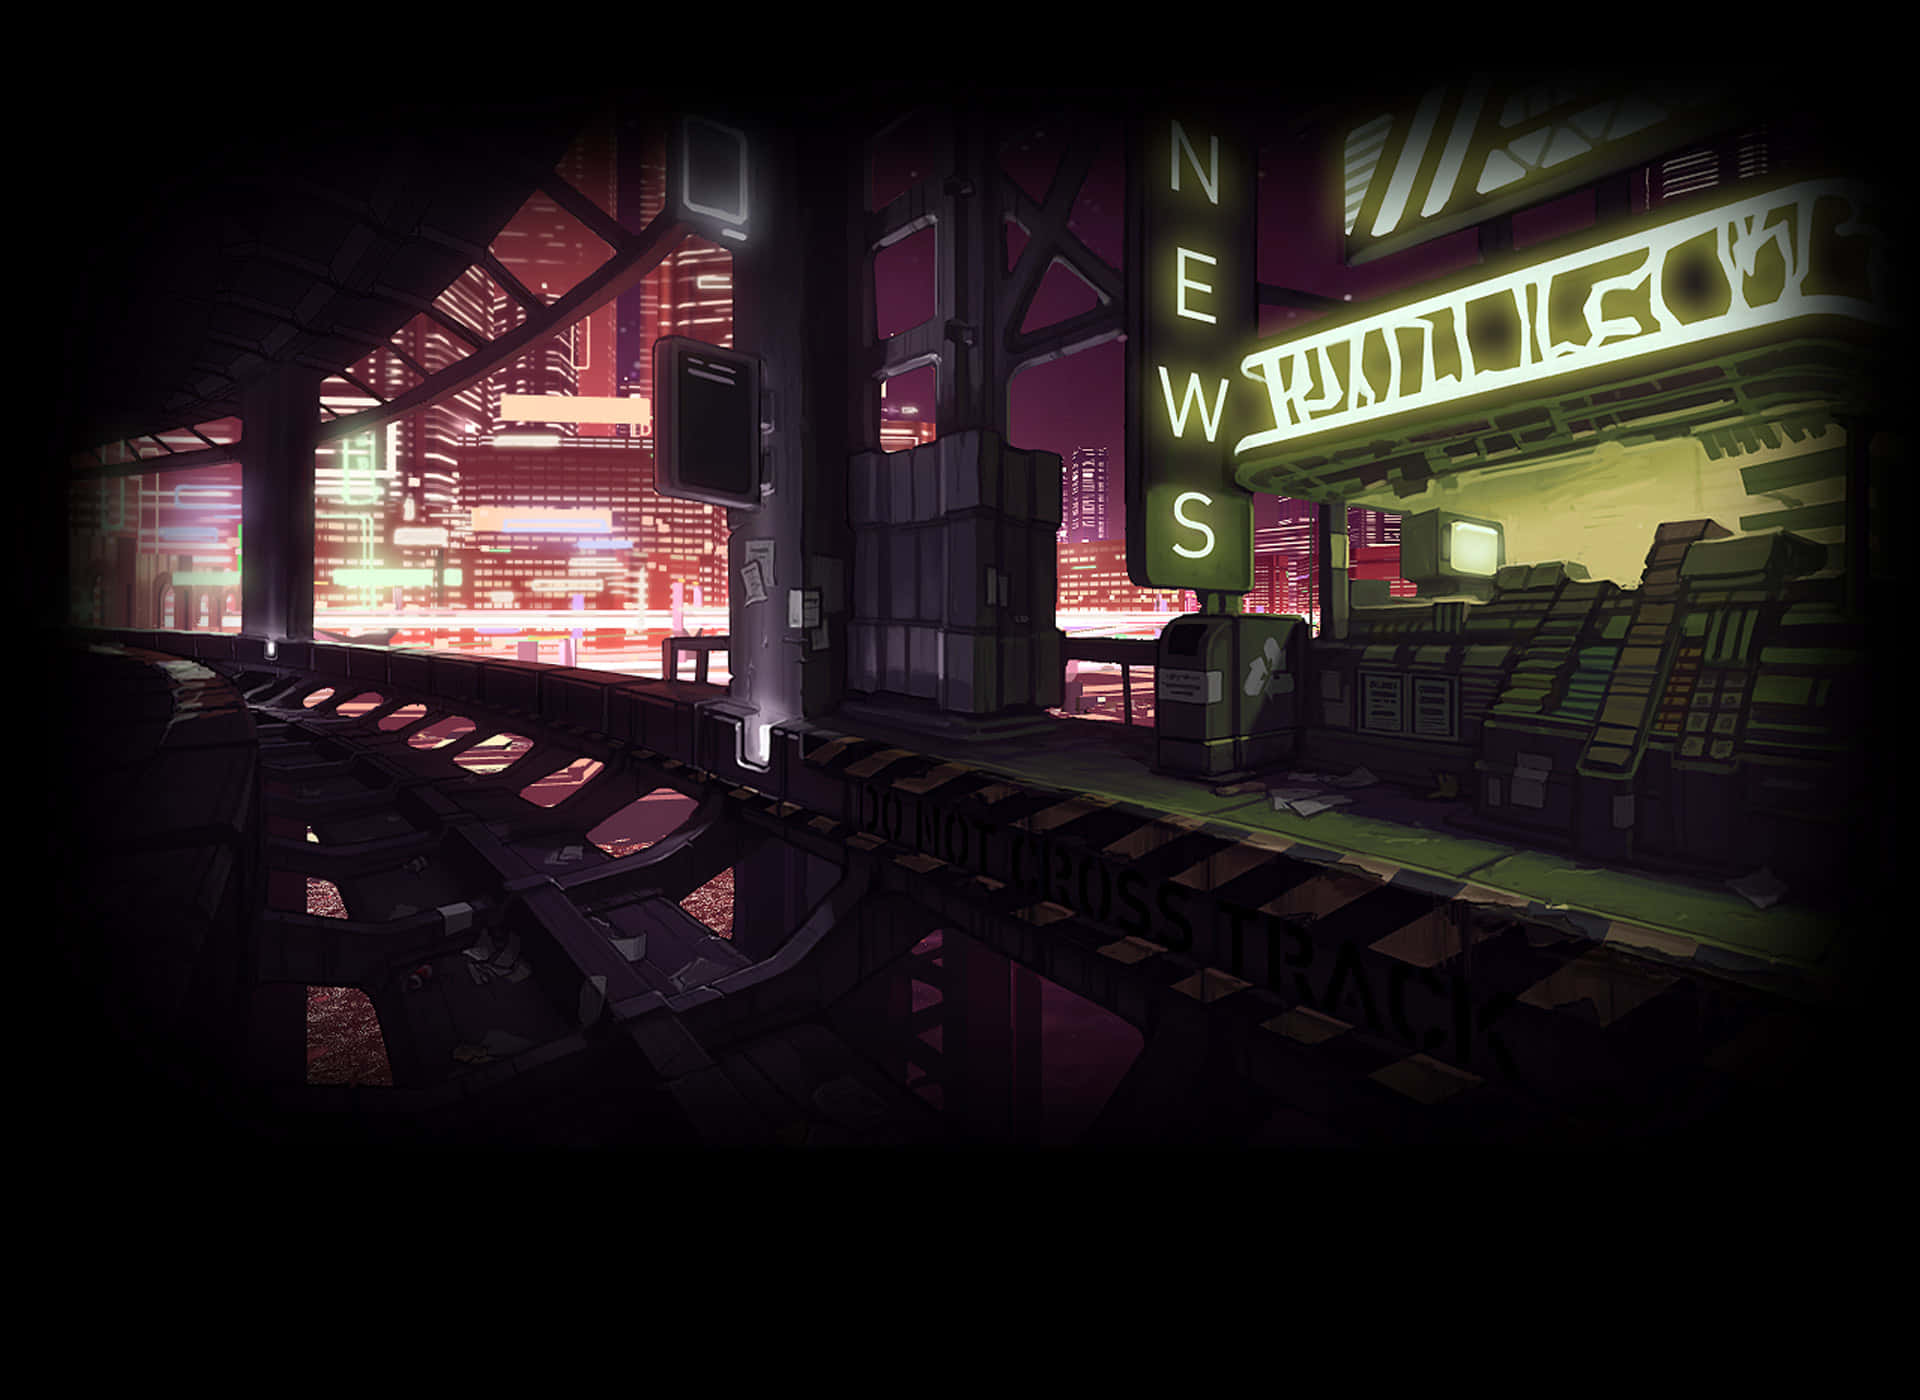 A Dark Scene With A Train Station And A Neon Sign